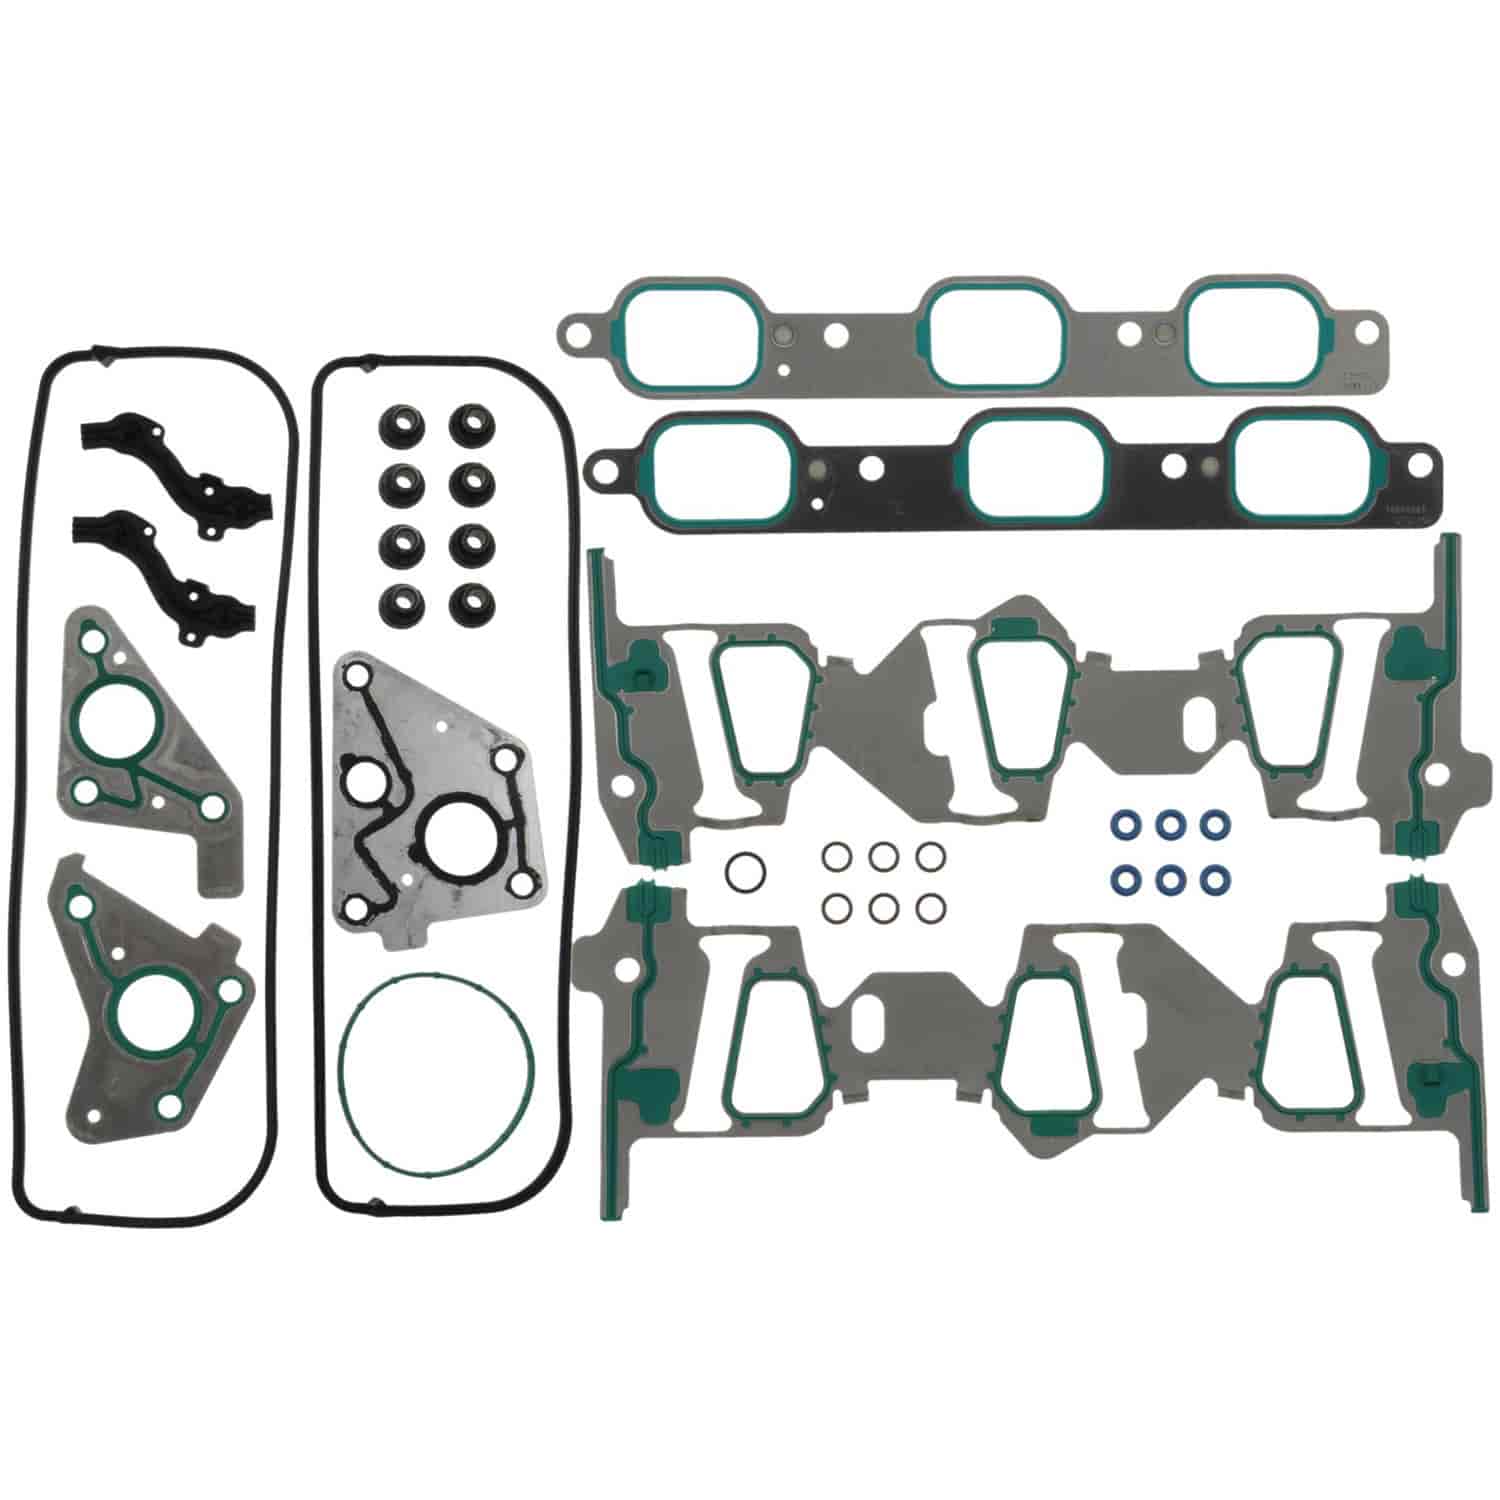 Intake Manifold Installation Kit 2006-2011 Buick/Chevy/Pontiac/Saturn with High Value V6 3.5/3.9L